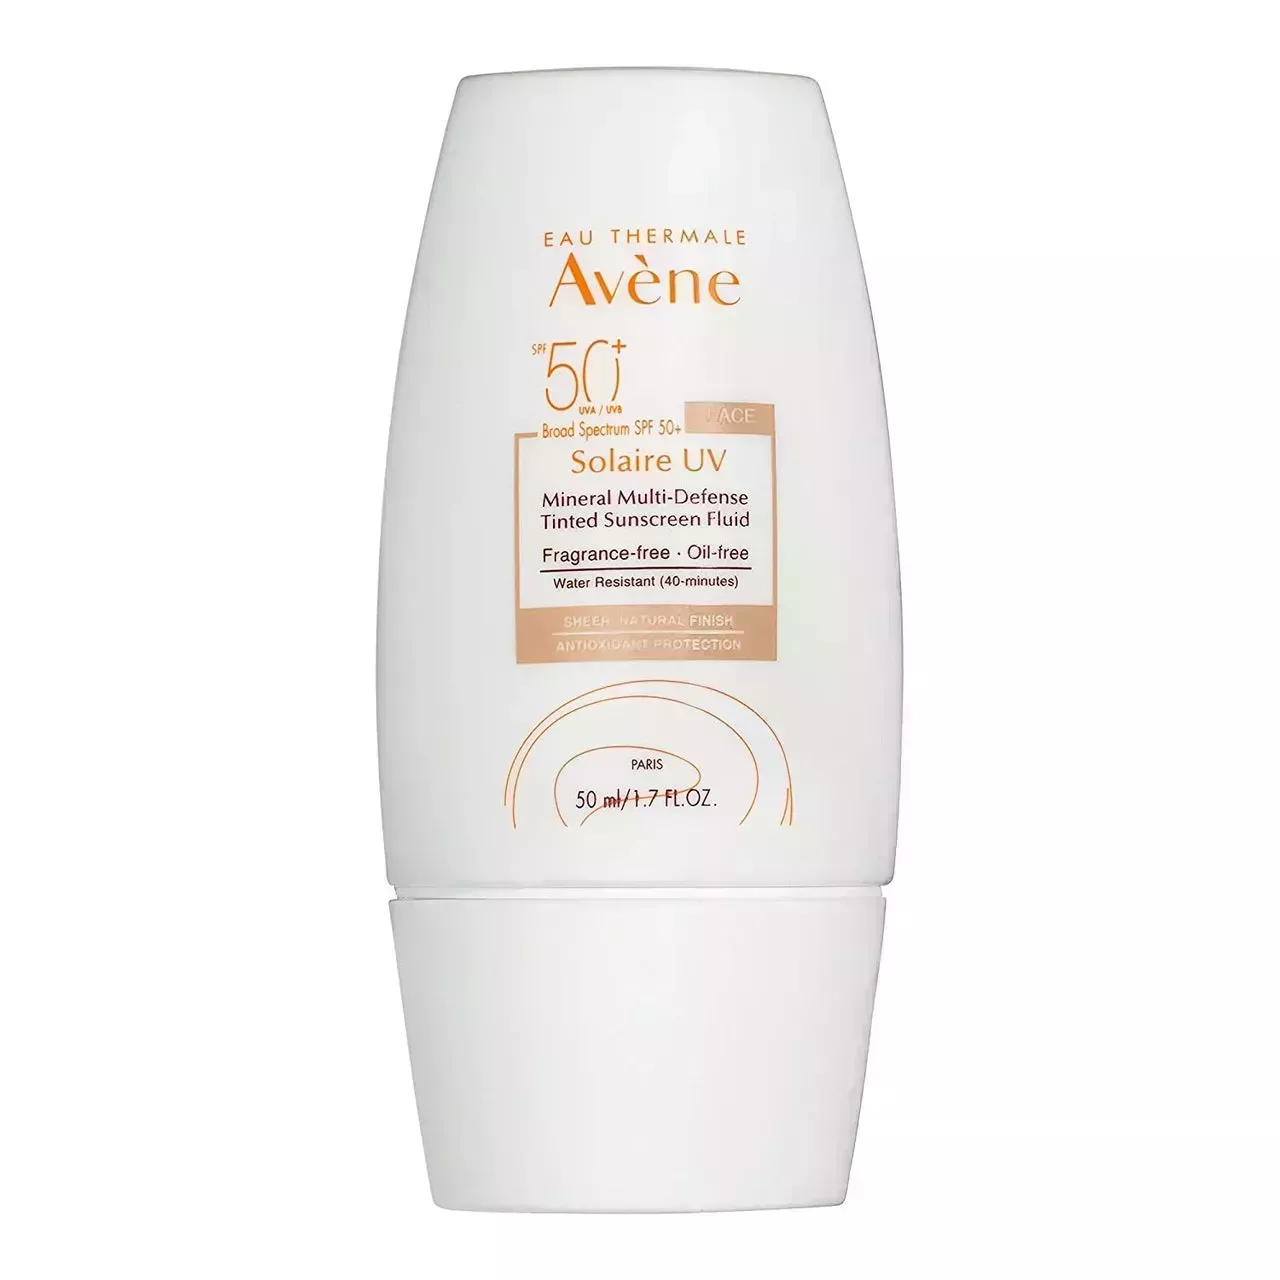 Eau Thermale Avene Solarie UV Mineral Multi-Defense Tinted Sunscreen Fluid on white background